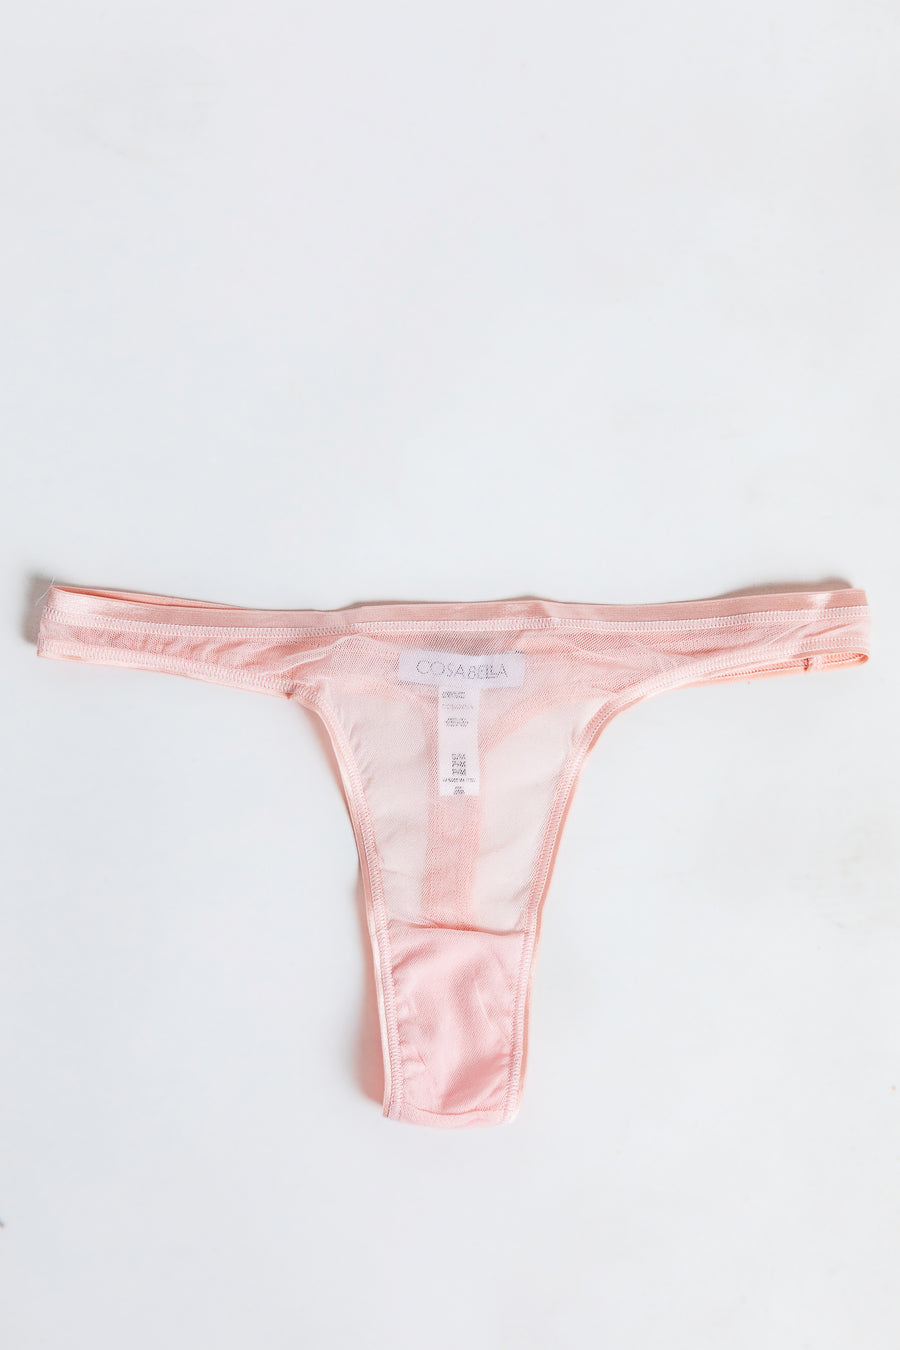 Cosabella Soire Confidence Thong in Pink Lily